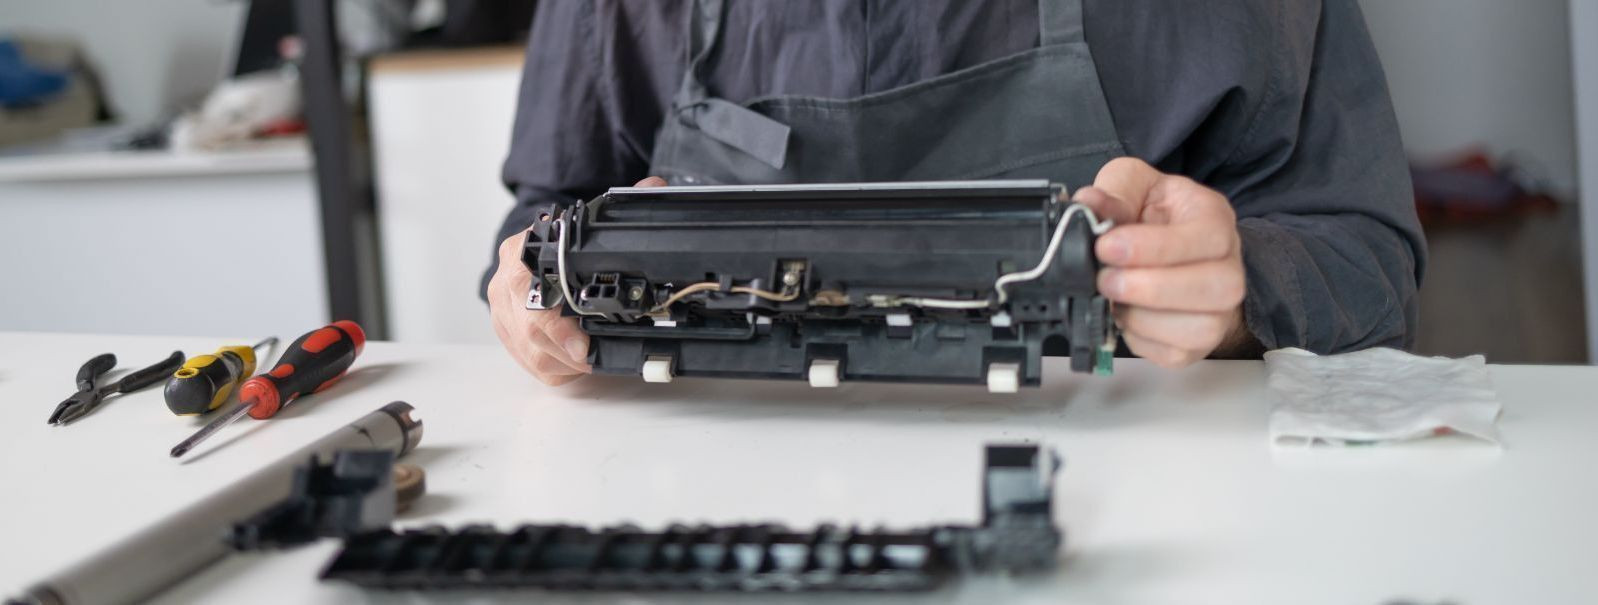 Printers are a critical component in the smooth operation of many businesses. However, like any other piece of technology, they require regular maintenance to f